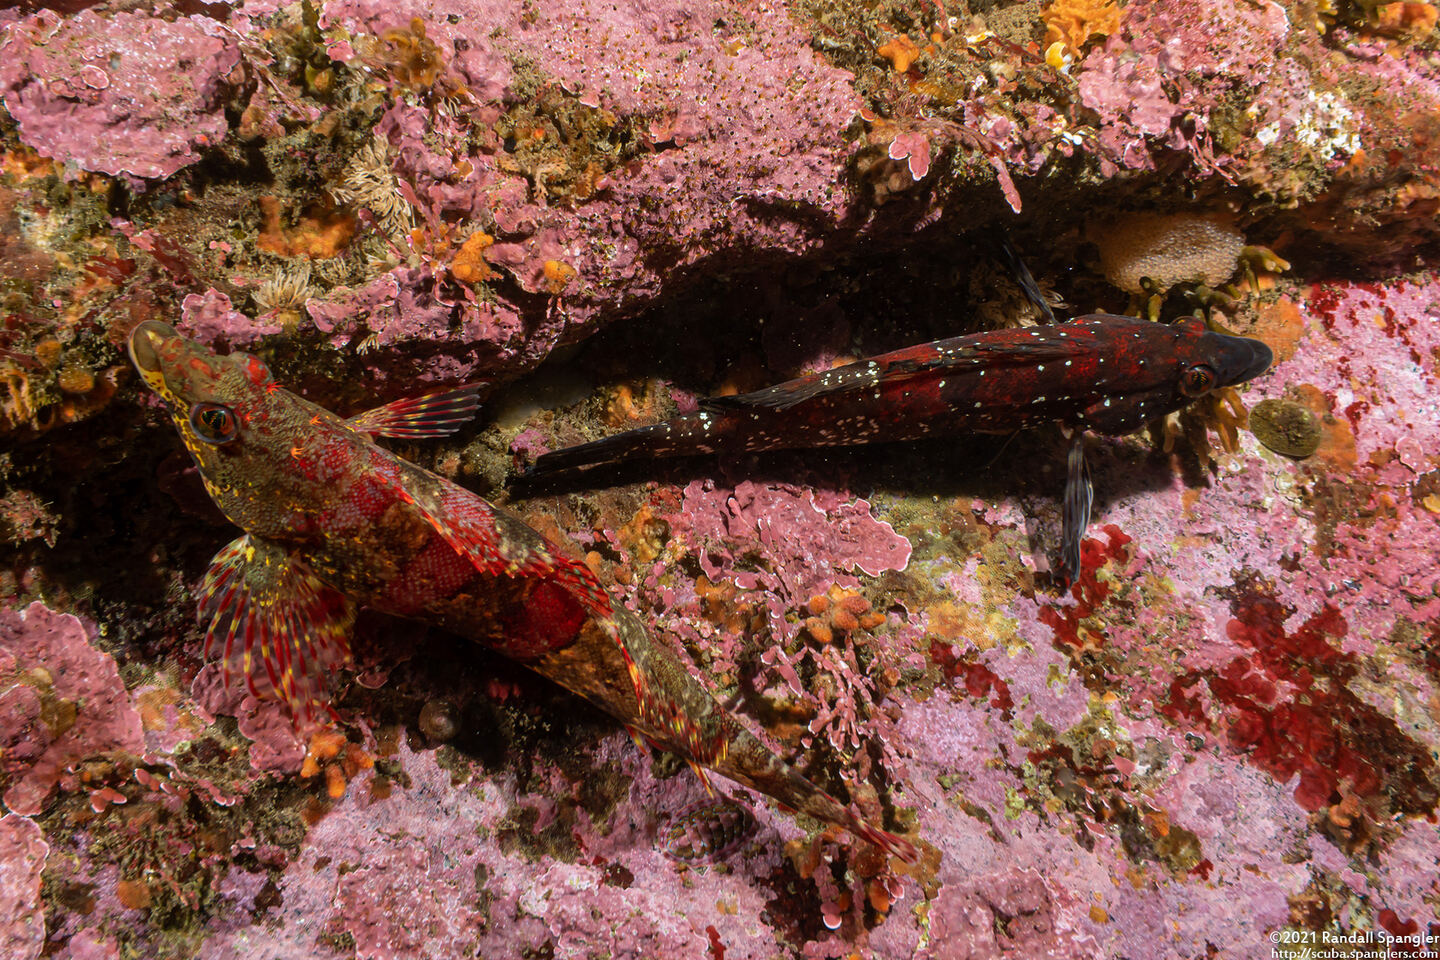 Oxylebius pictus (Painted Greenling); Mated pair with eggs